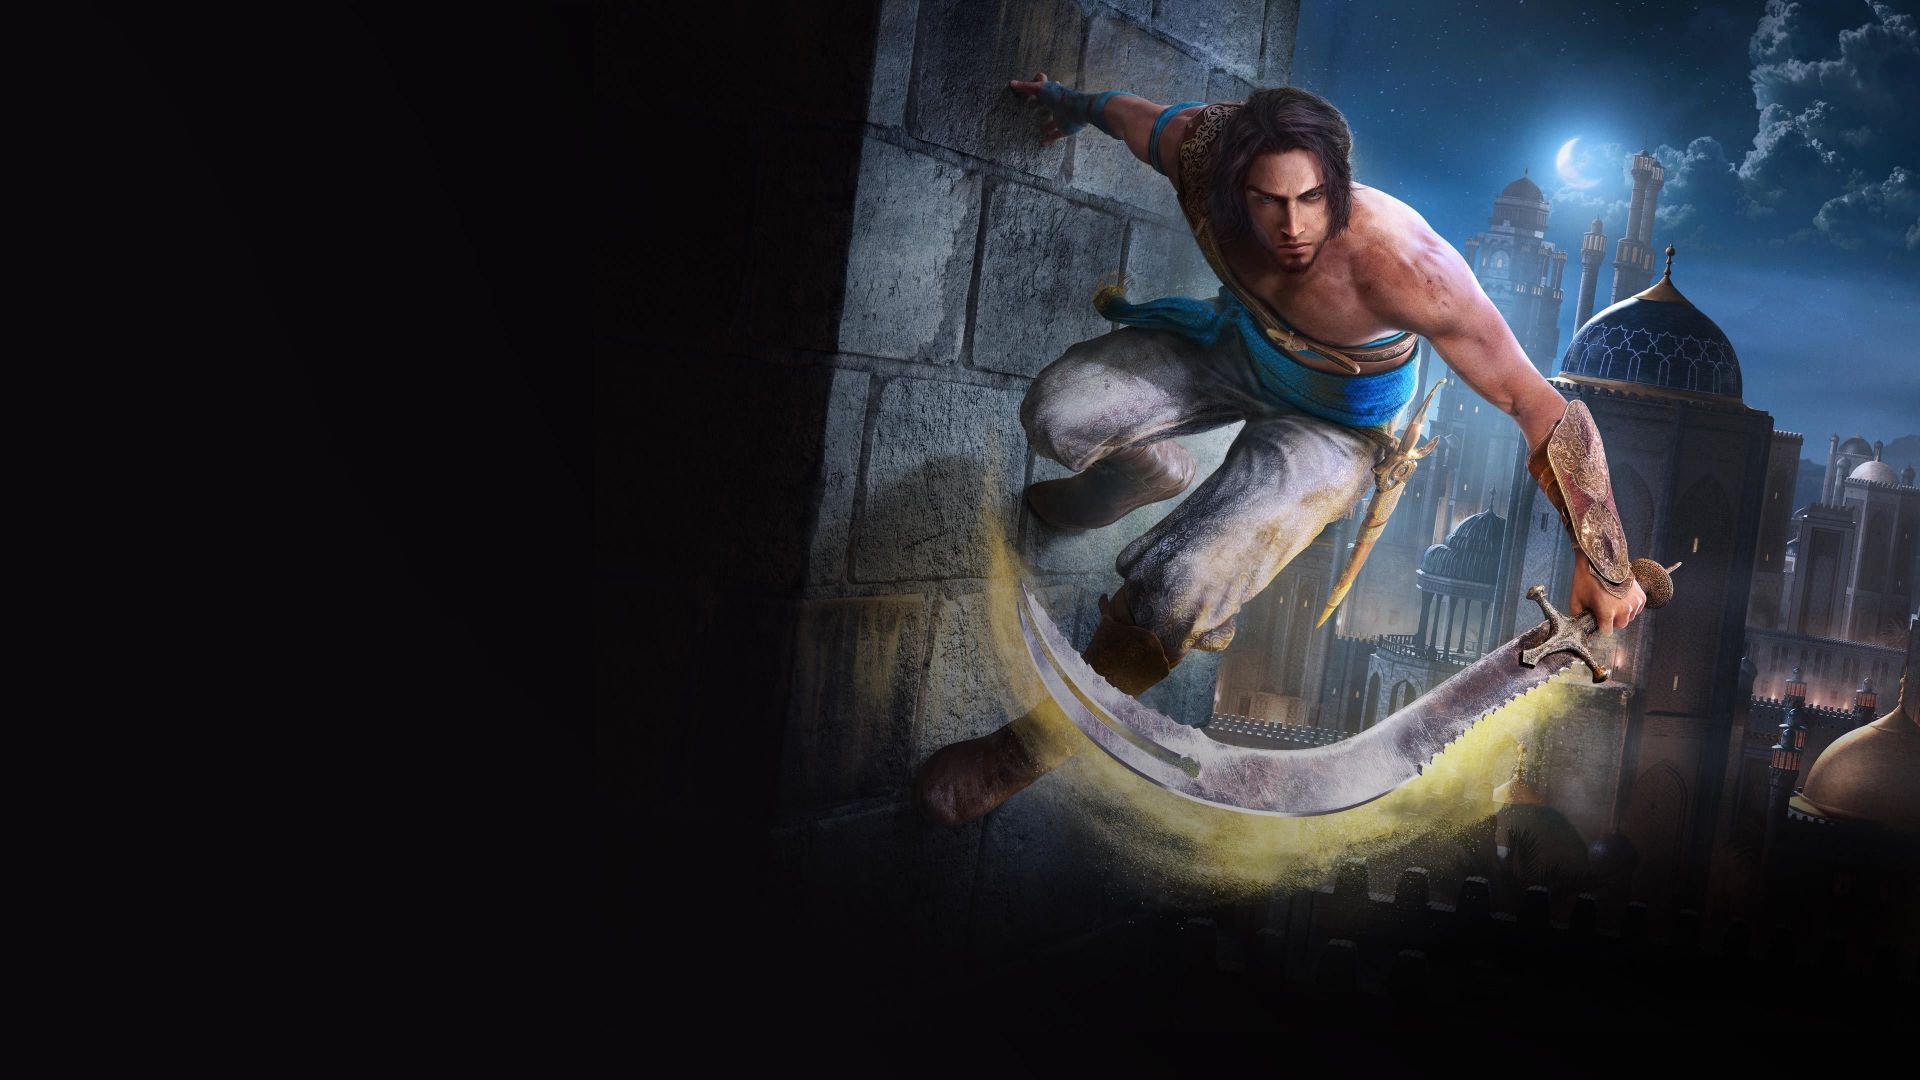 Wallpaper Character of game, Prince of Persia: The Sands of Time, artwork